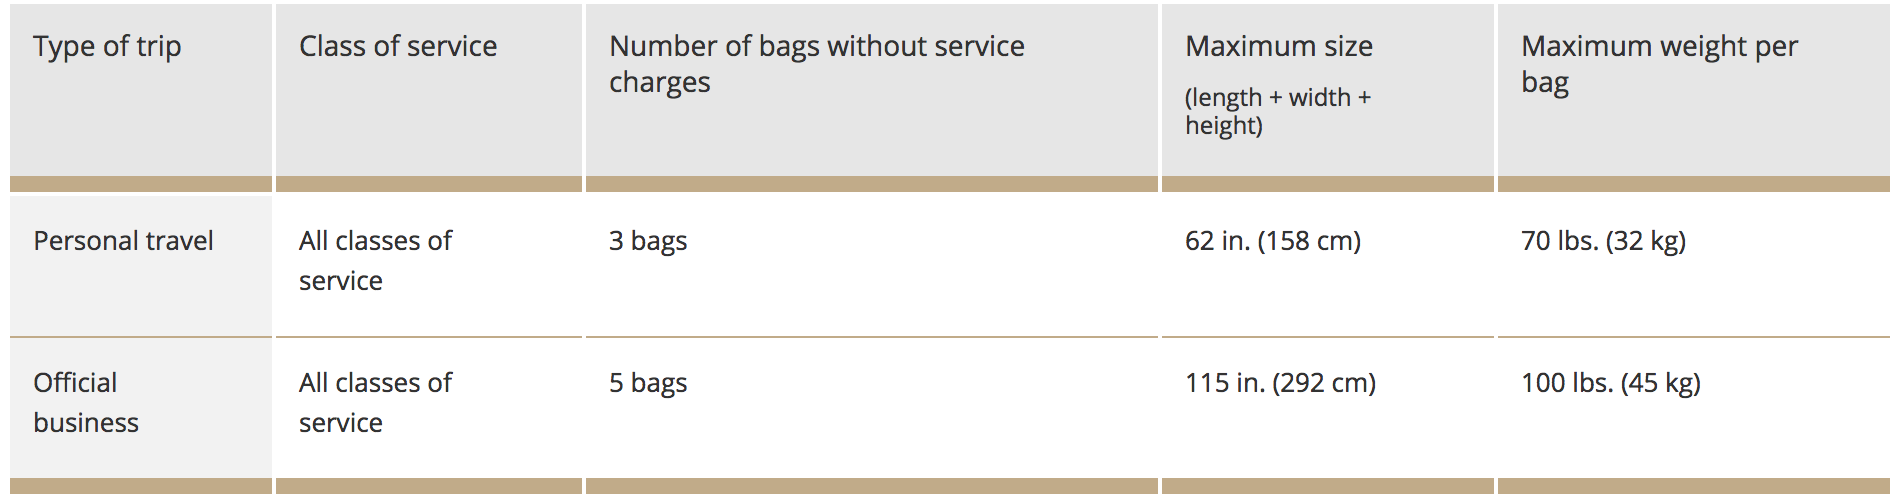 United Airlines Carry On Baggage Allowance and Baggage Fees 2022.  LuggageToShip